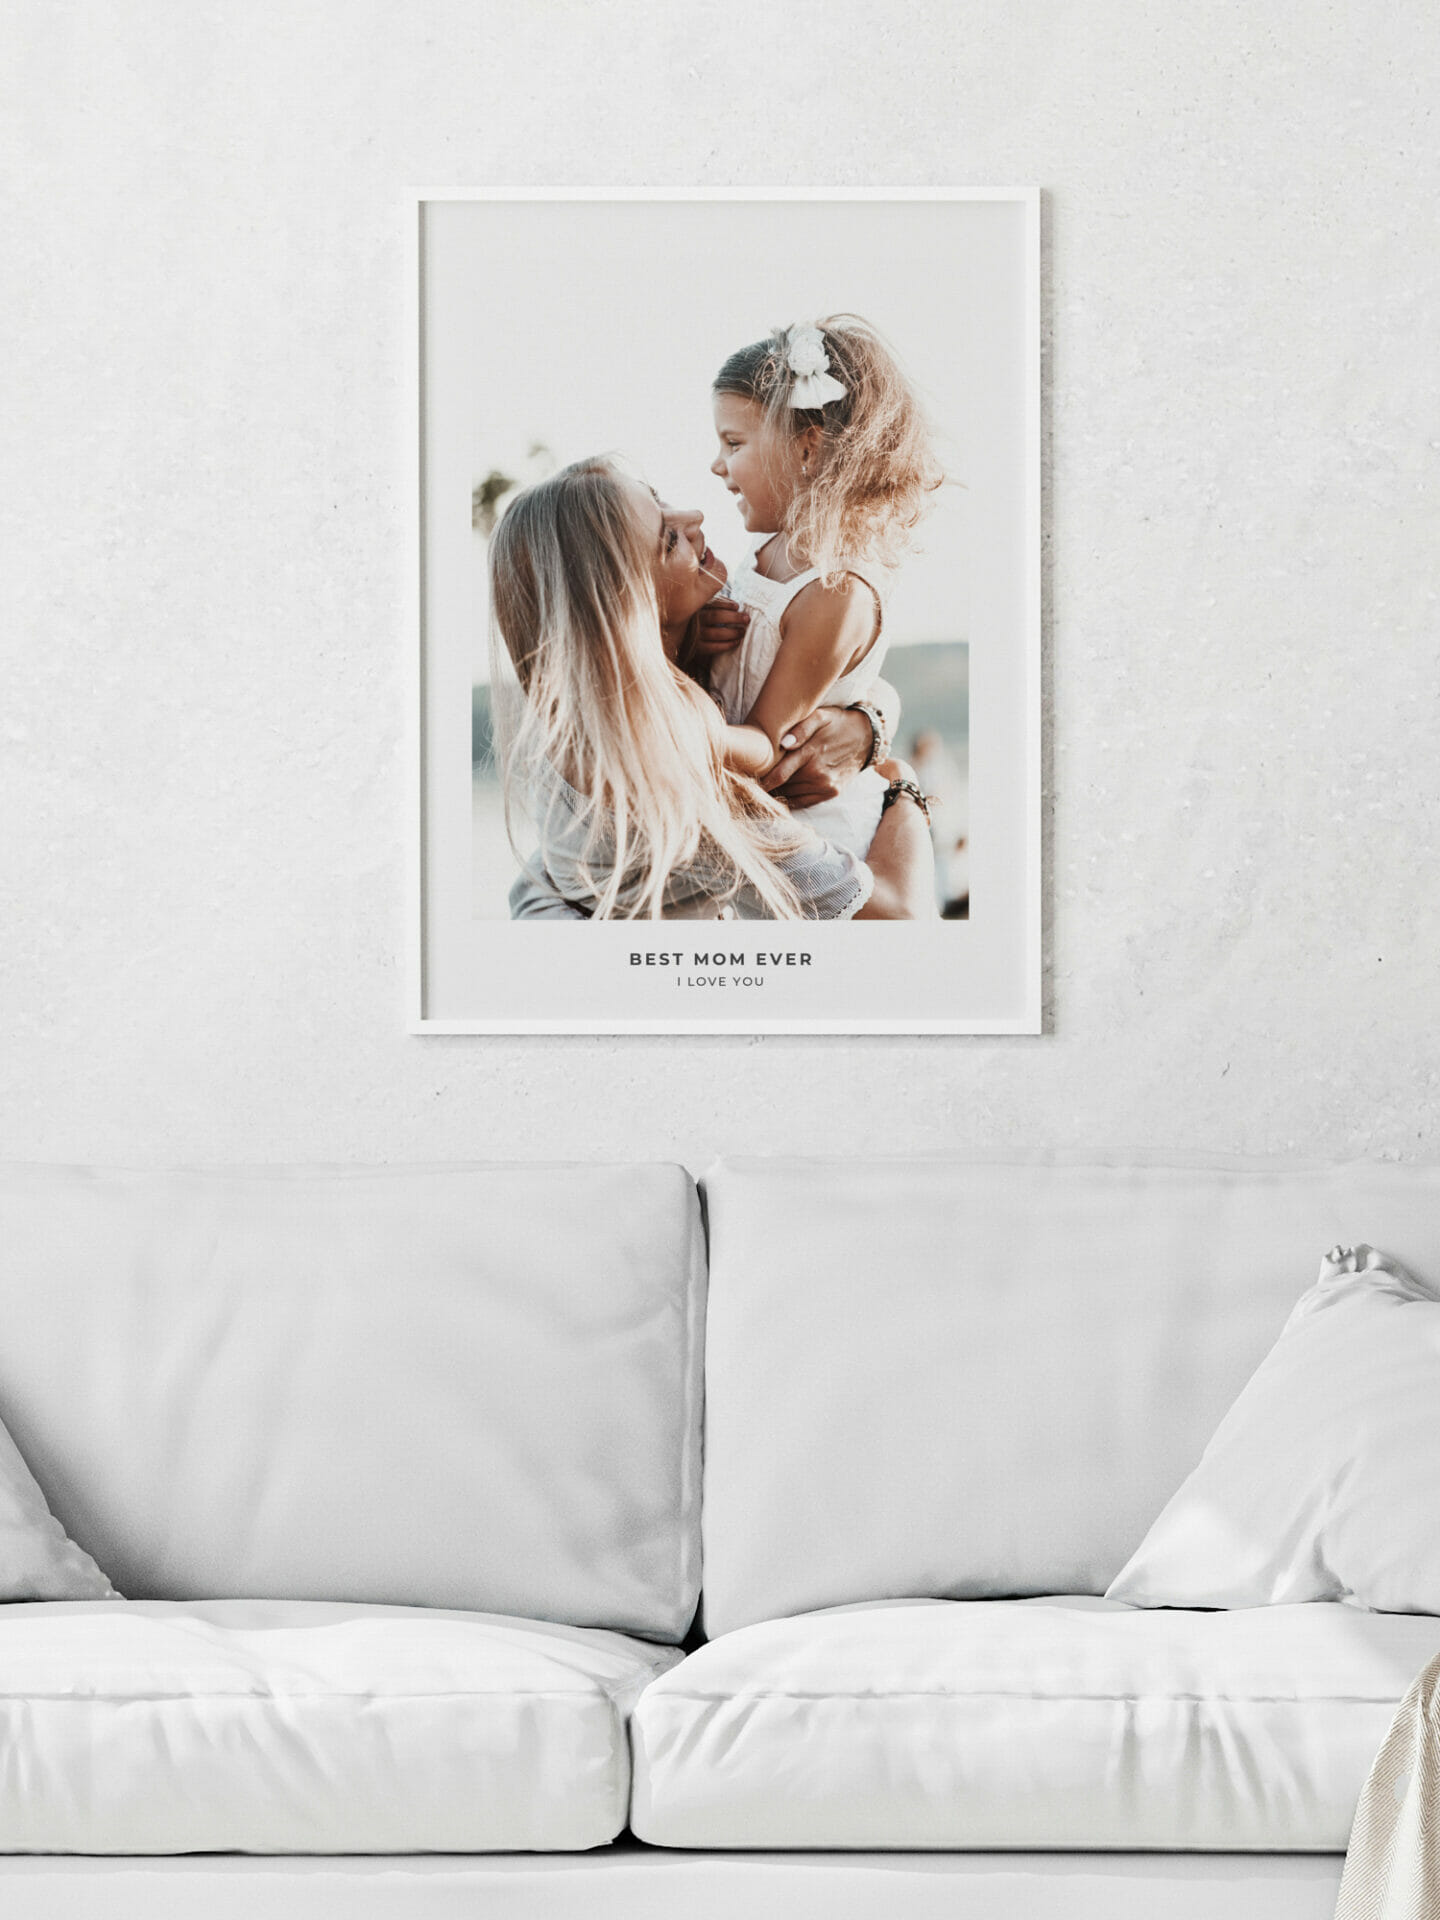 Poster of mother and daughter in interior